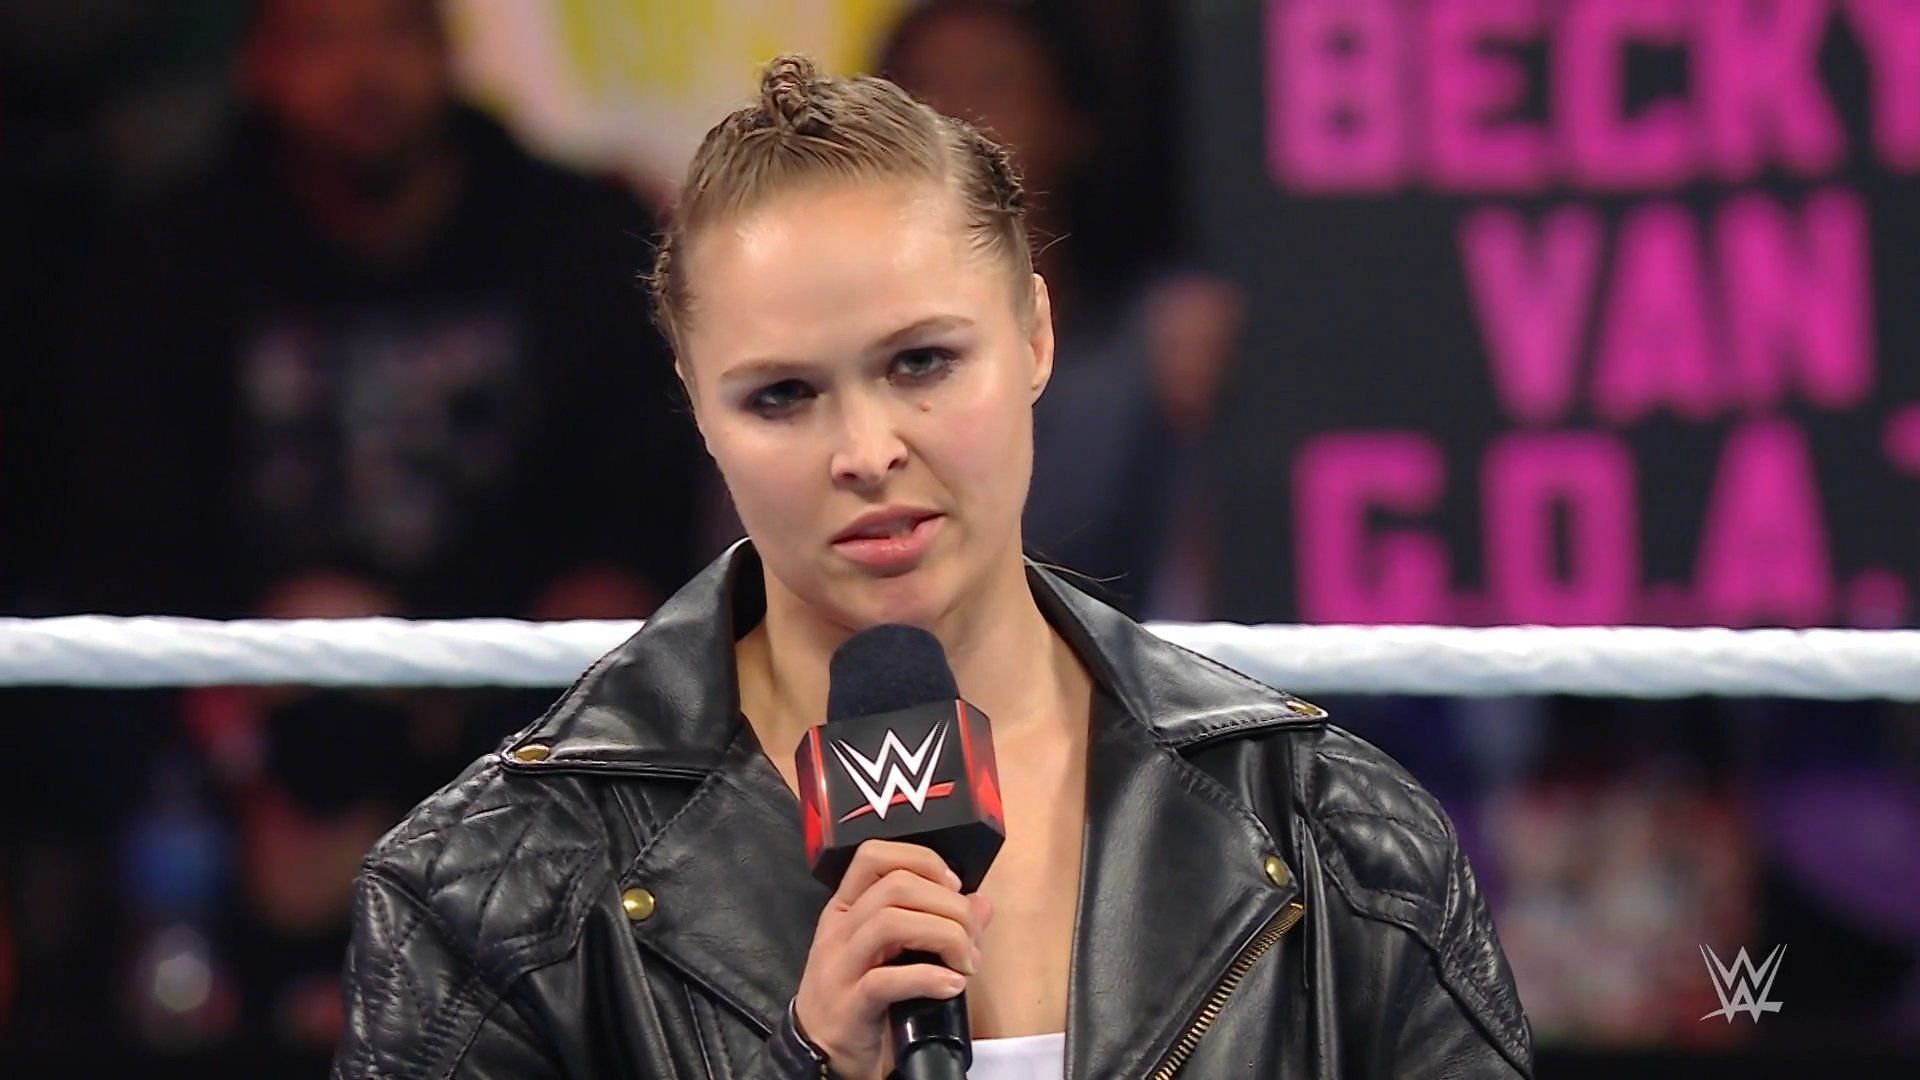 Ronda Rousey will wrestle for the first time since her Royal Rumble return at Elimination Chamber